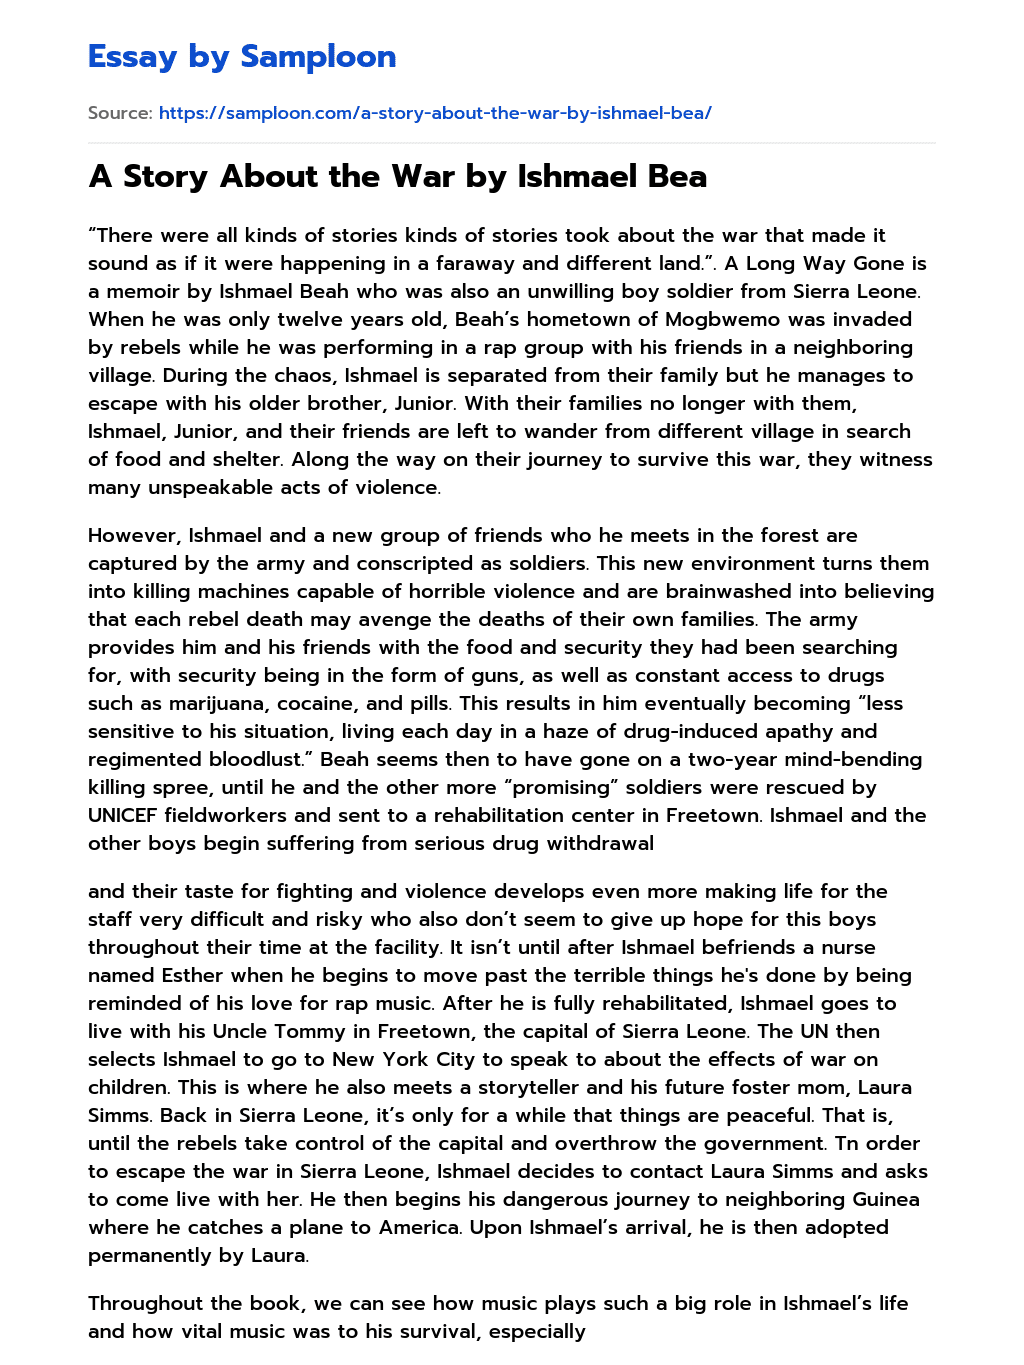 A Story About the War by Ishmael Bea essay